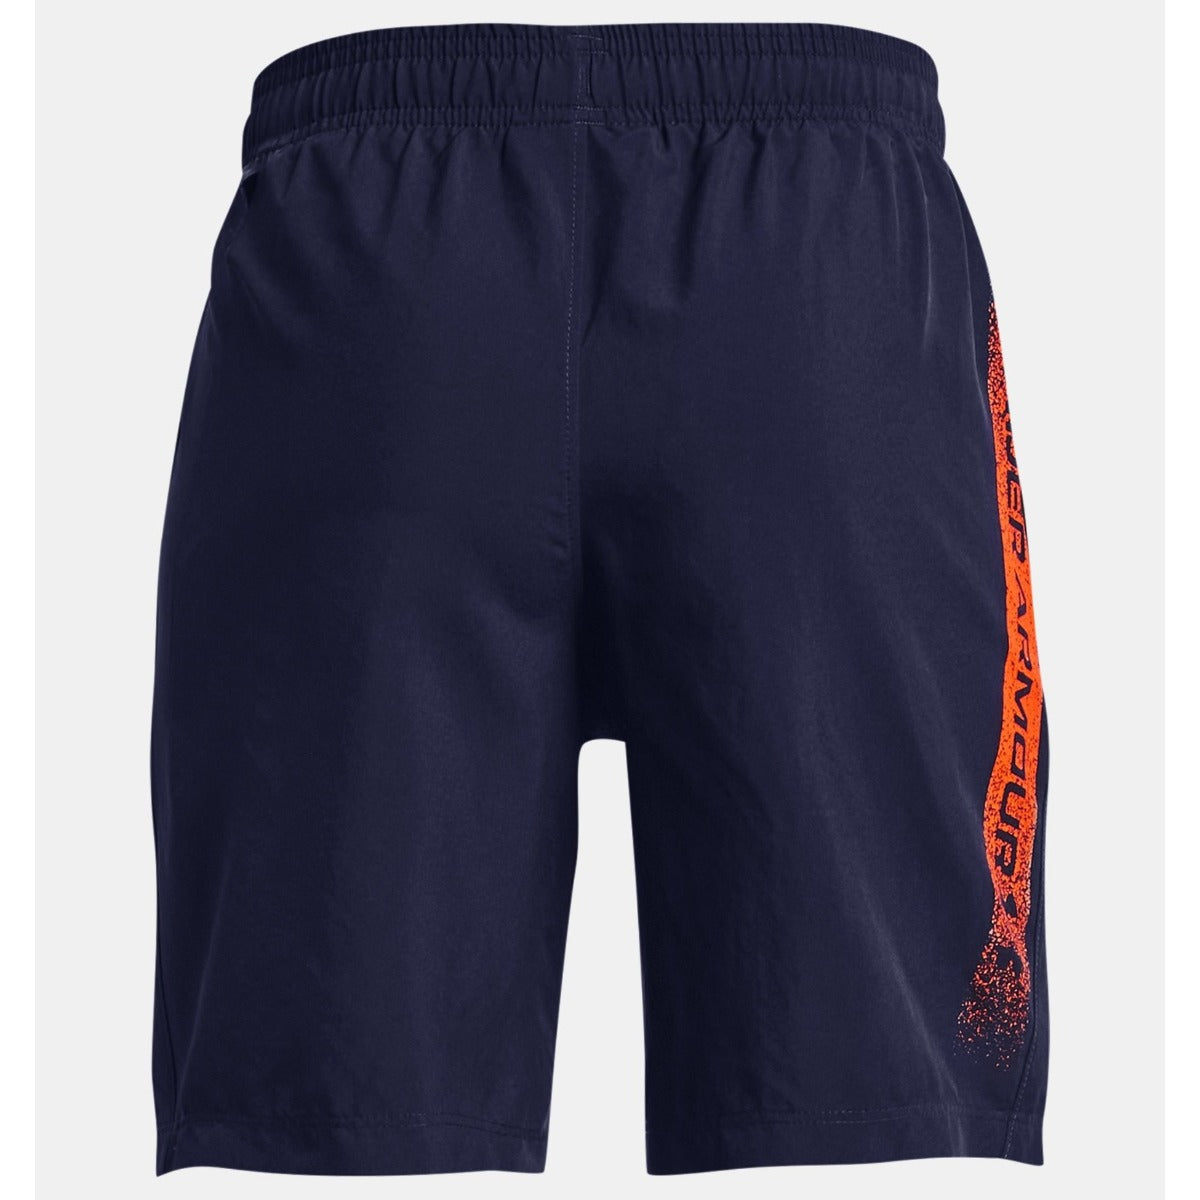 UNDER ARMOUR WOVEN GRAPHIC SHORTS BOYS